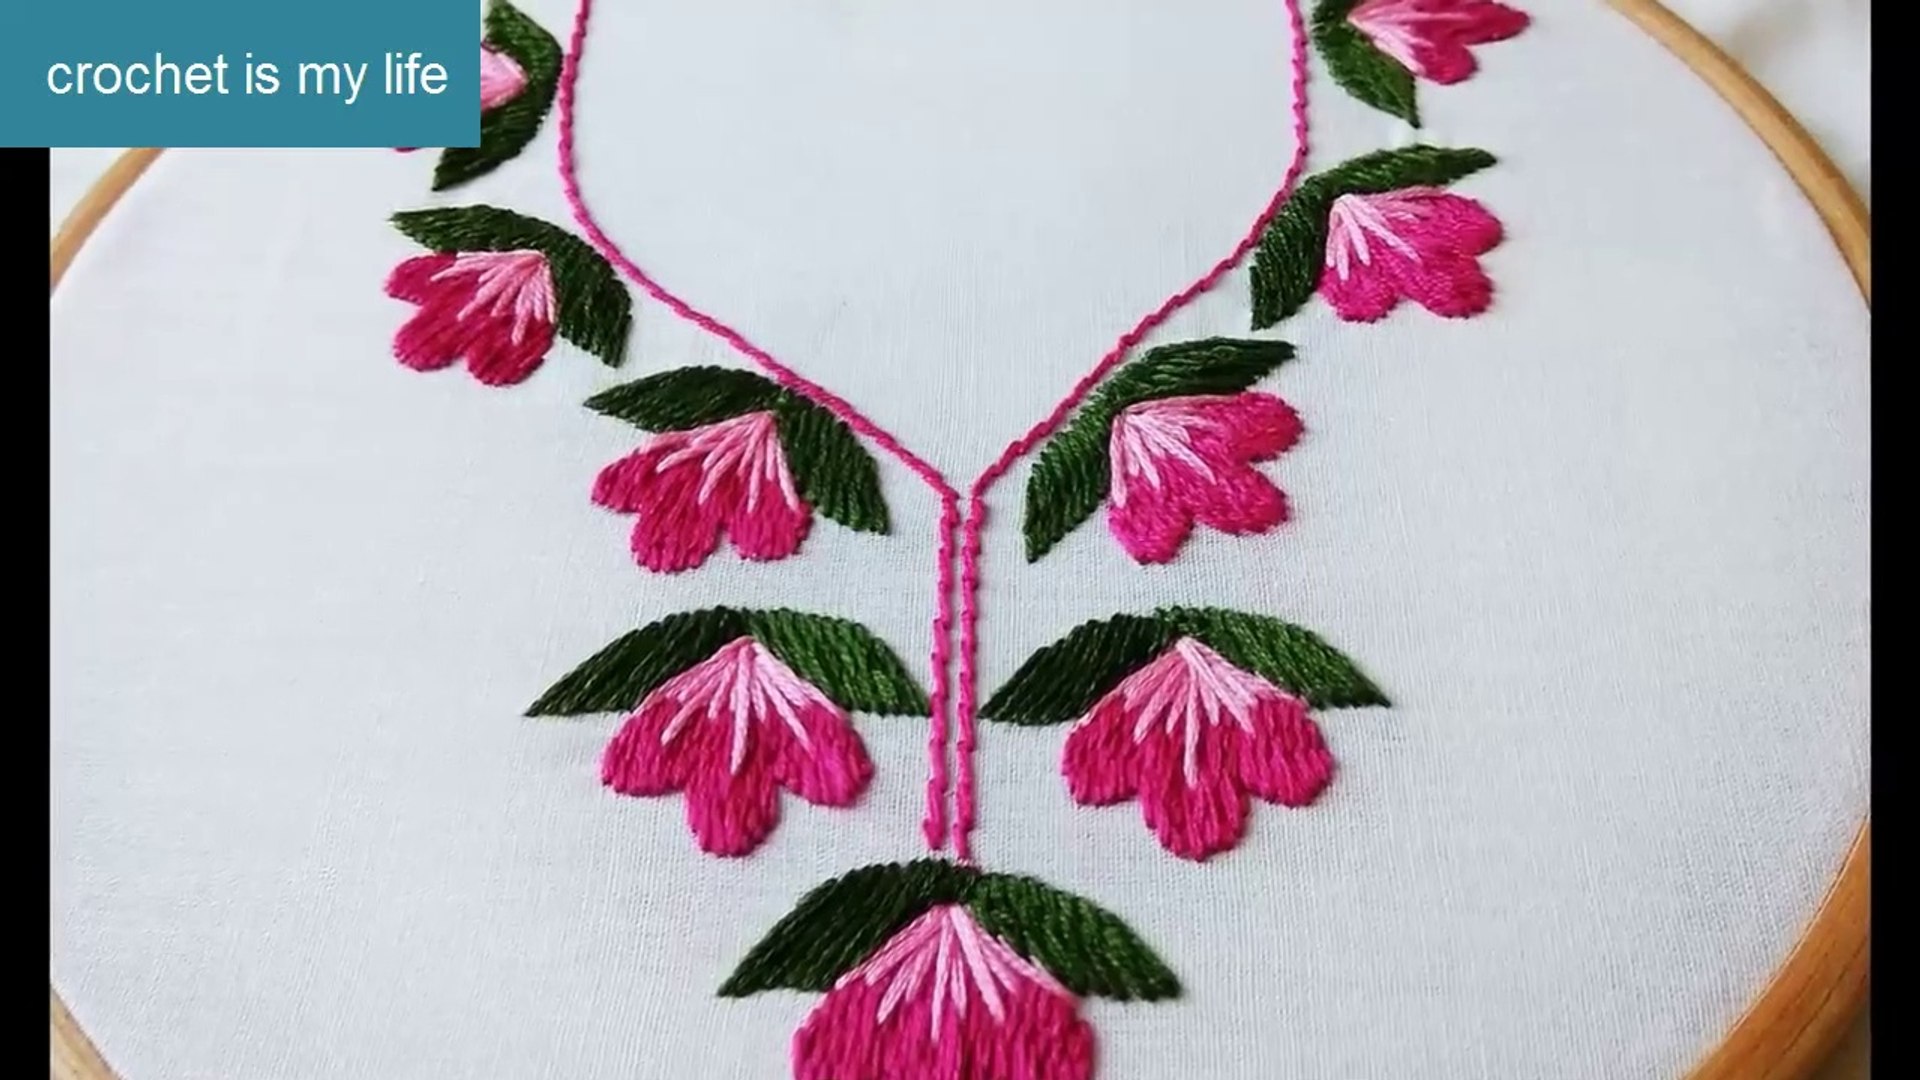 Neck embroidery design- Step by step 